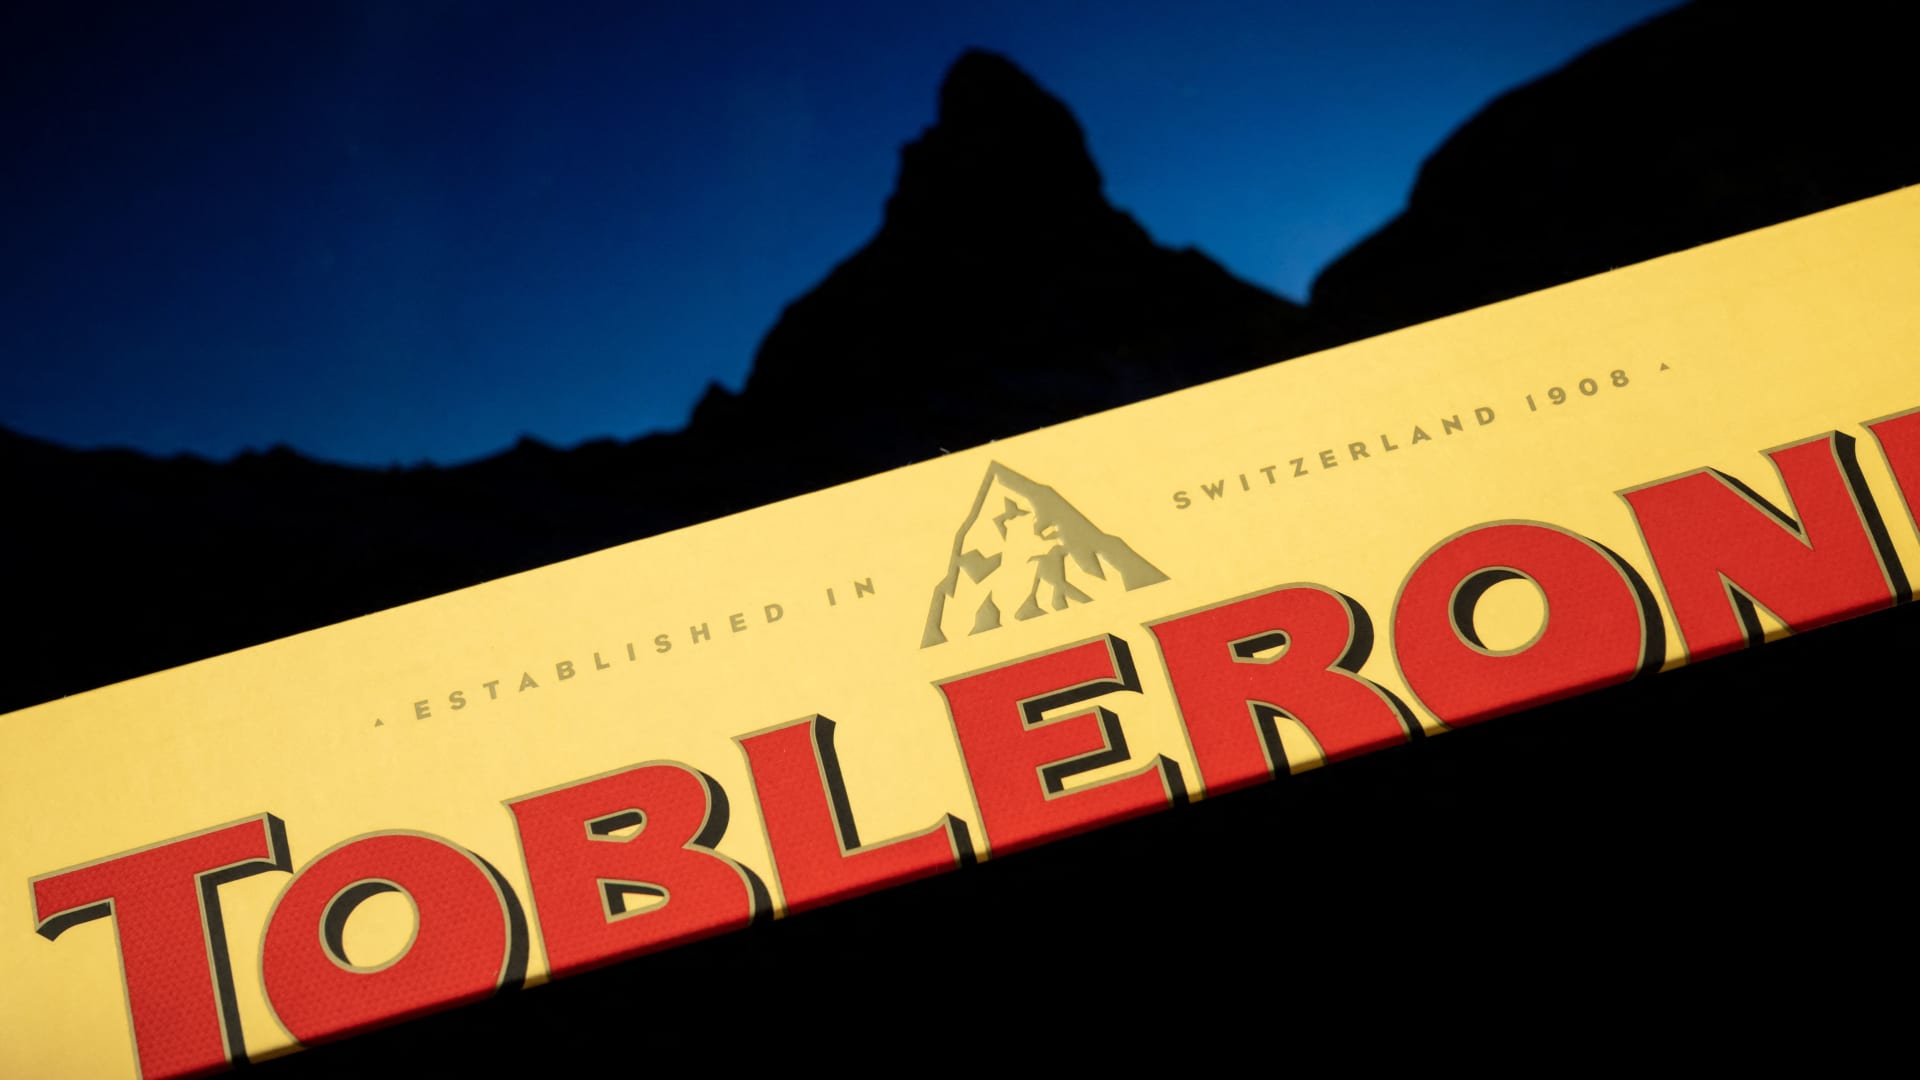 Toblerone chocolate to cut iconic Matterhorn logo from packaging due to 'Swissness' laws